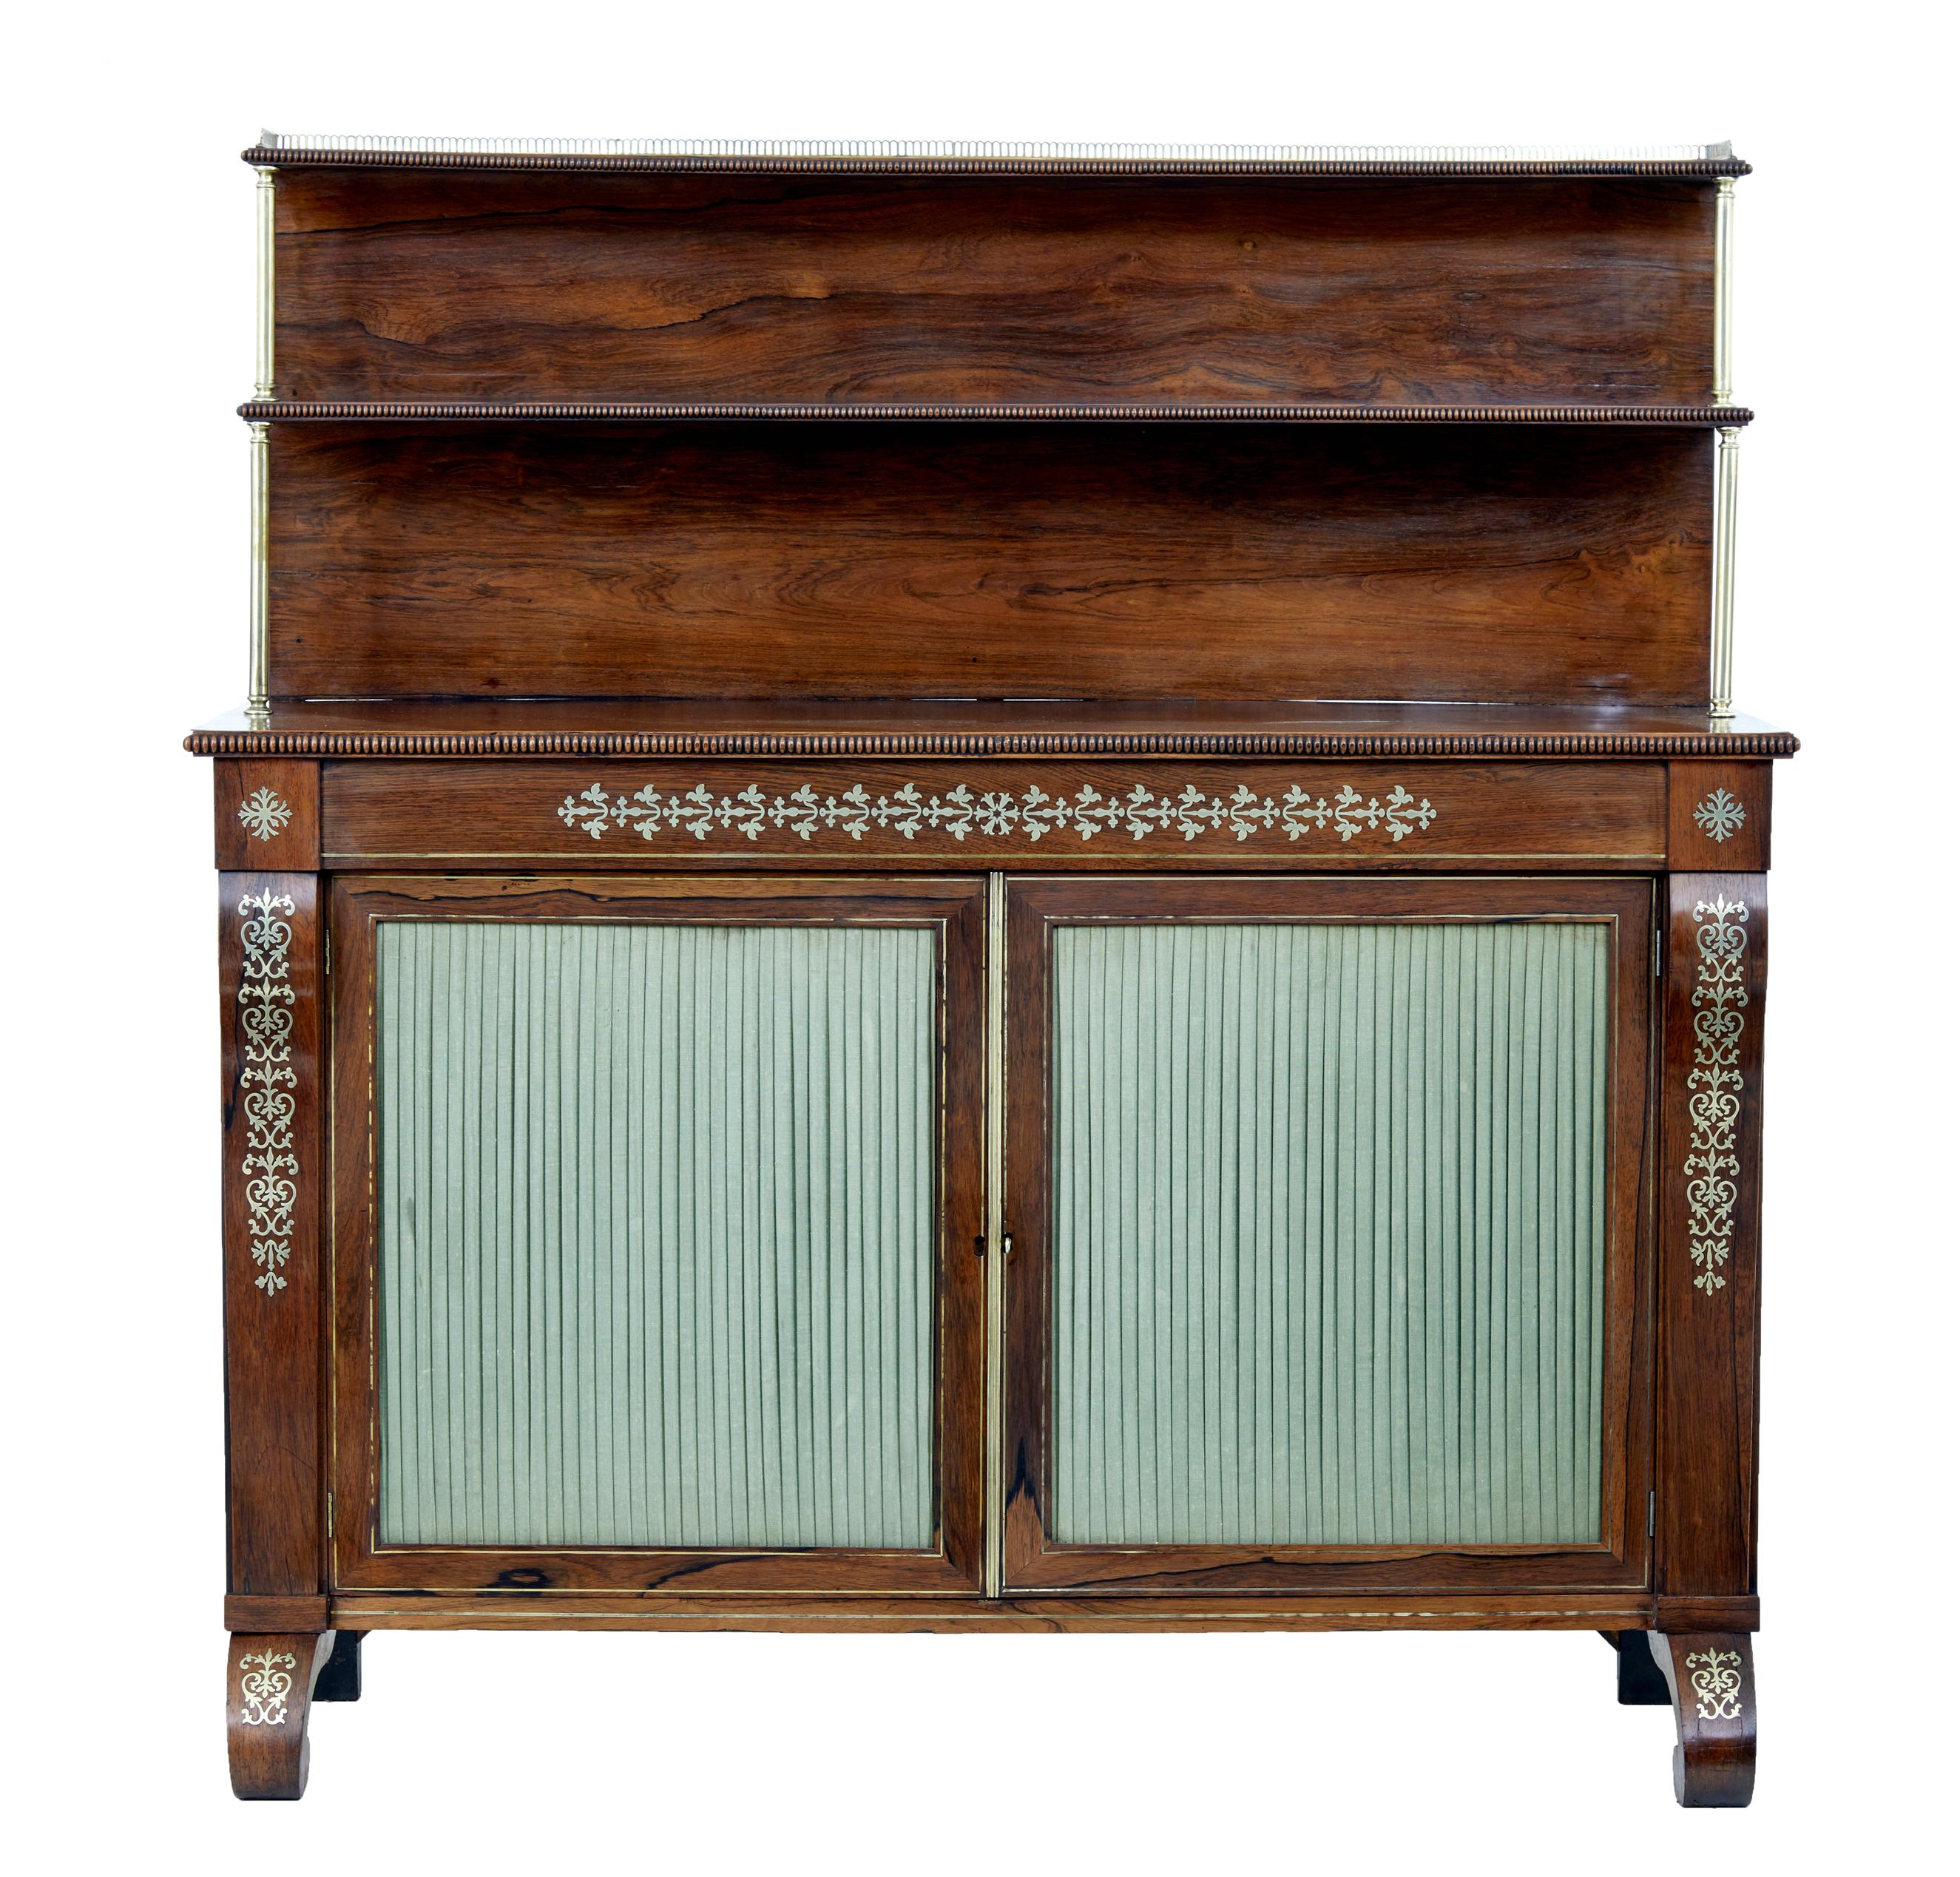 Fine quality Regency period chiffonier, circa 1820.

Top shelf with brass gallery detailed with a beaded edge. Second shelf supported by brass column supports. Main body beautifully decorated with inlaid brass designs to the front and legs. Double